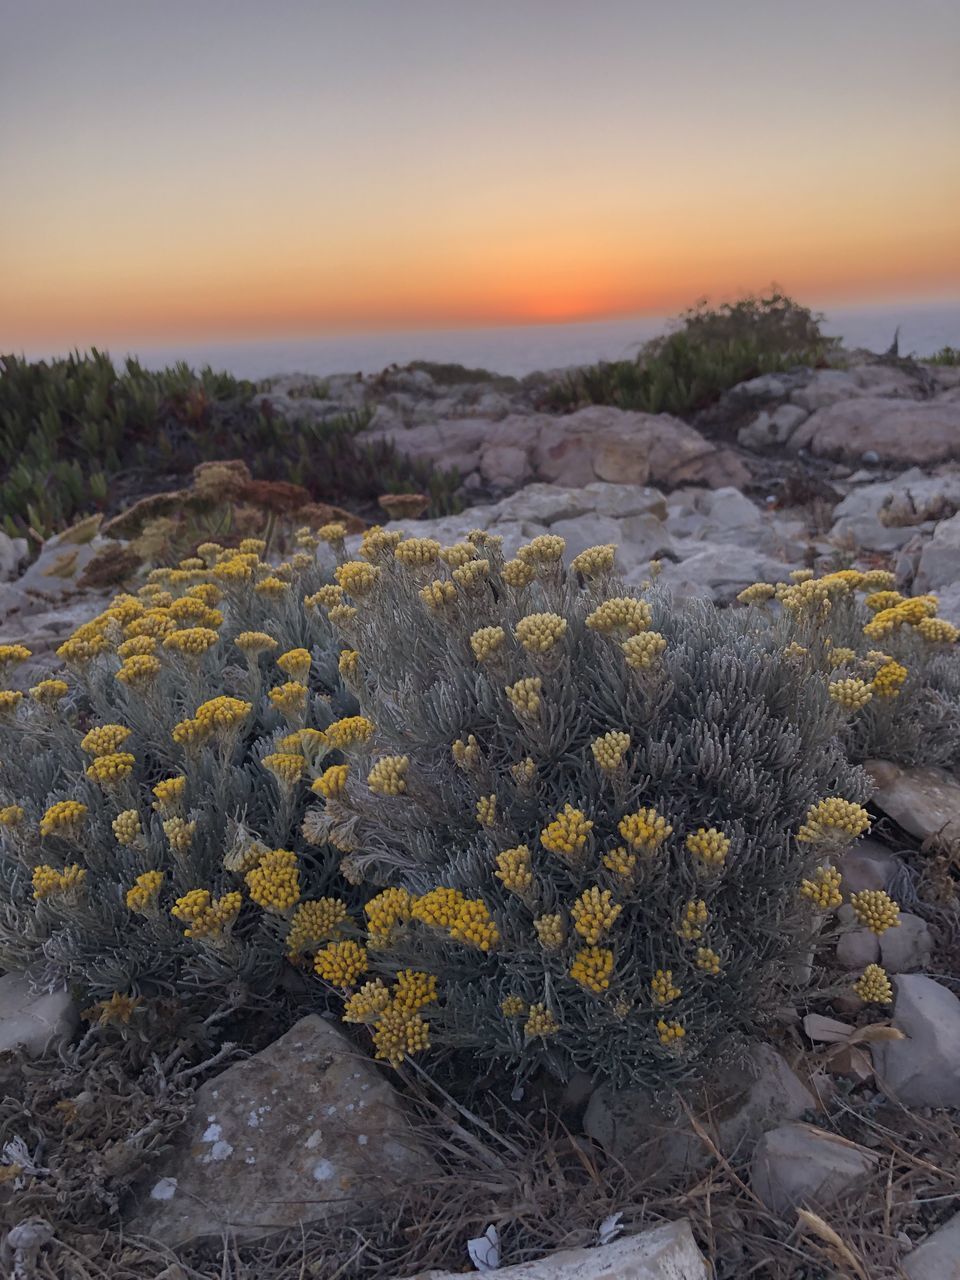 SCENIC VIEW OF YELLOW FLOWERS AGAINST SKY AT SUNSET